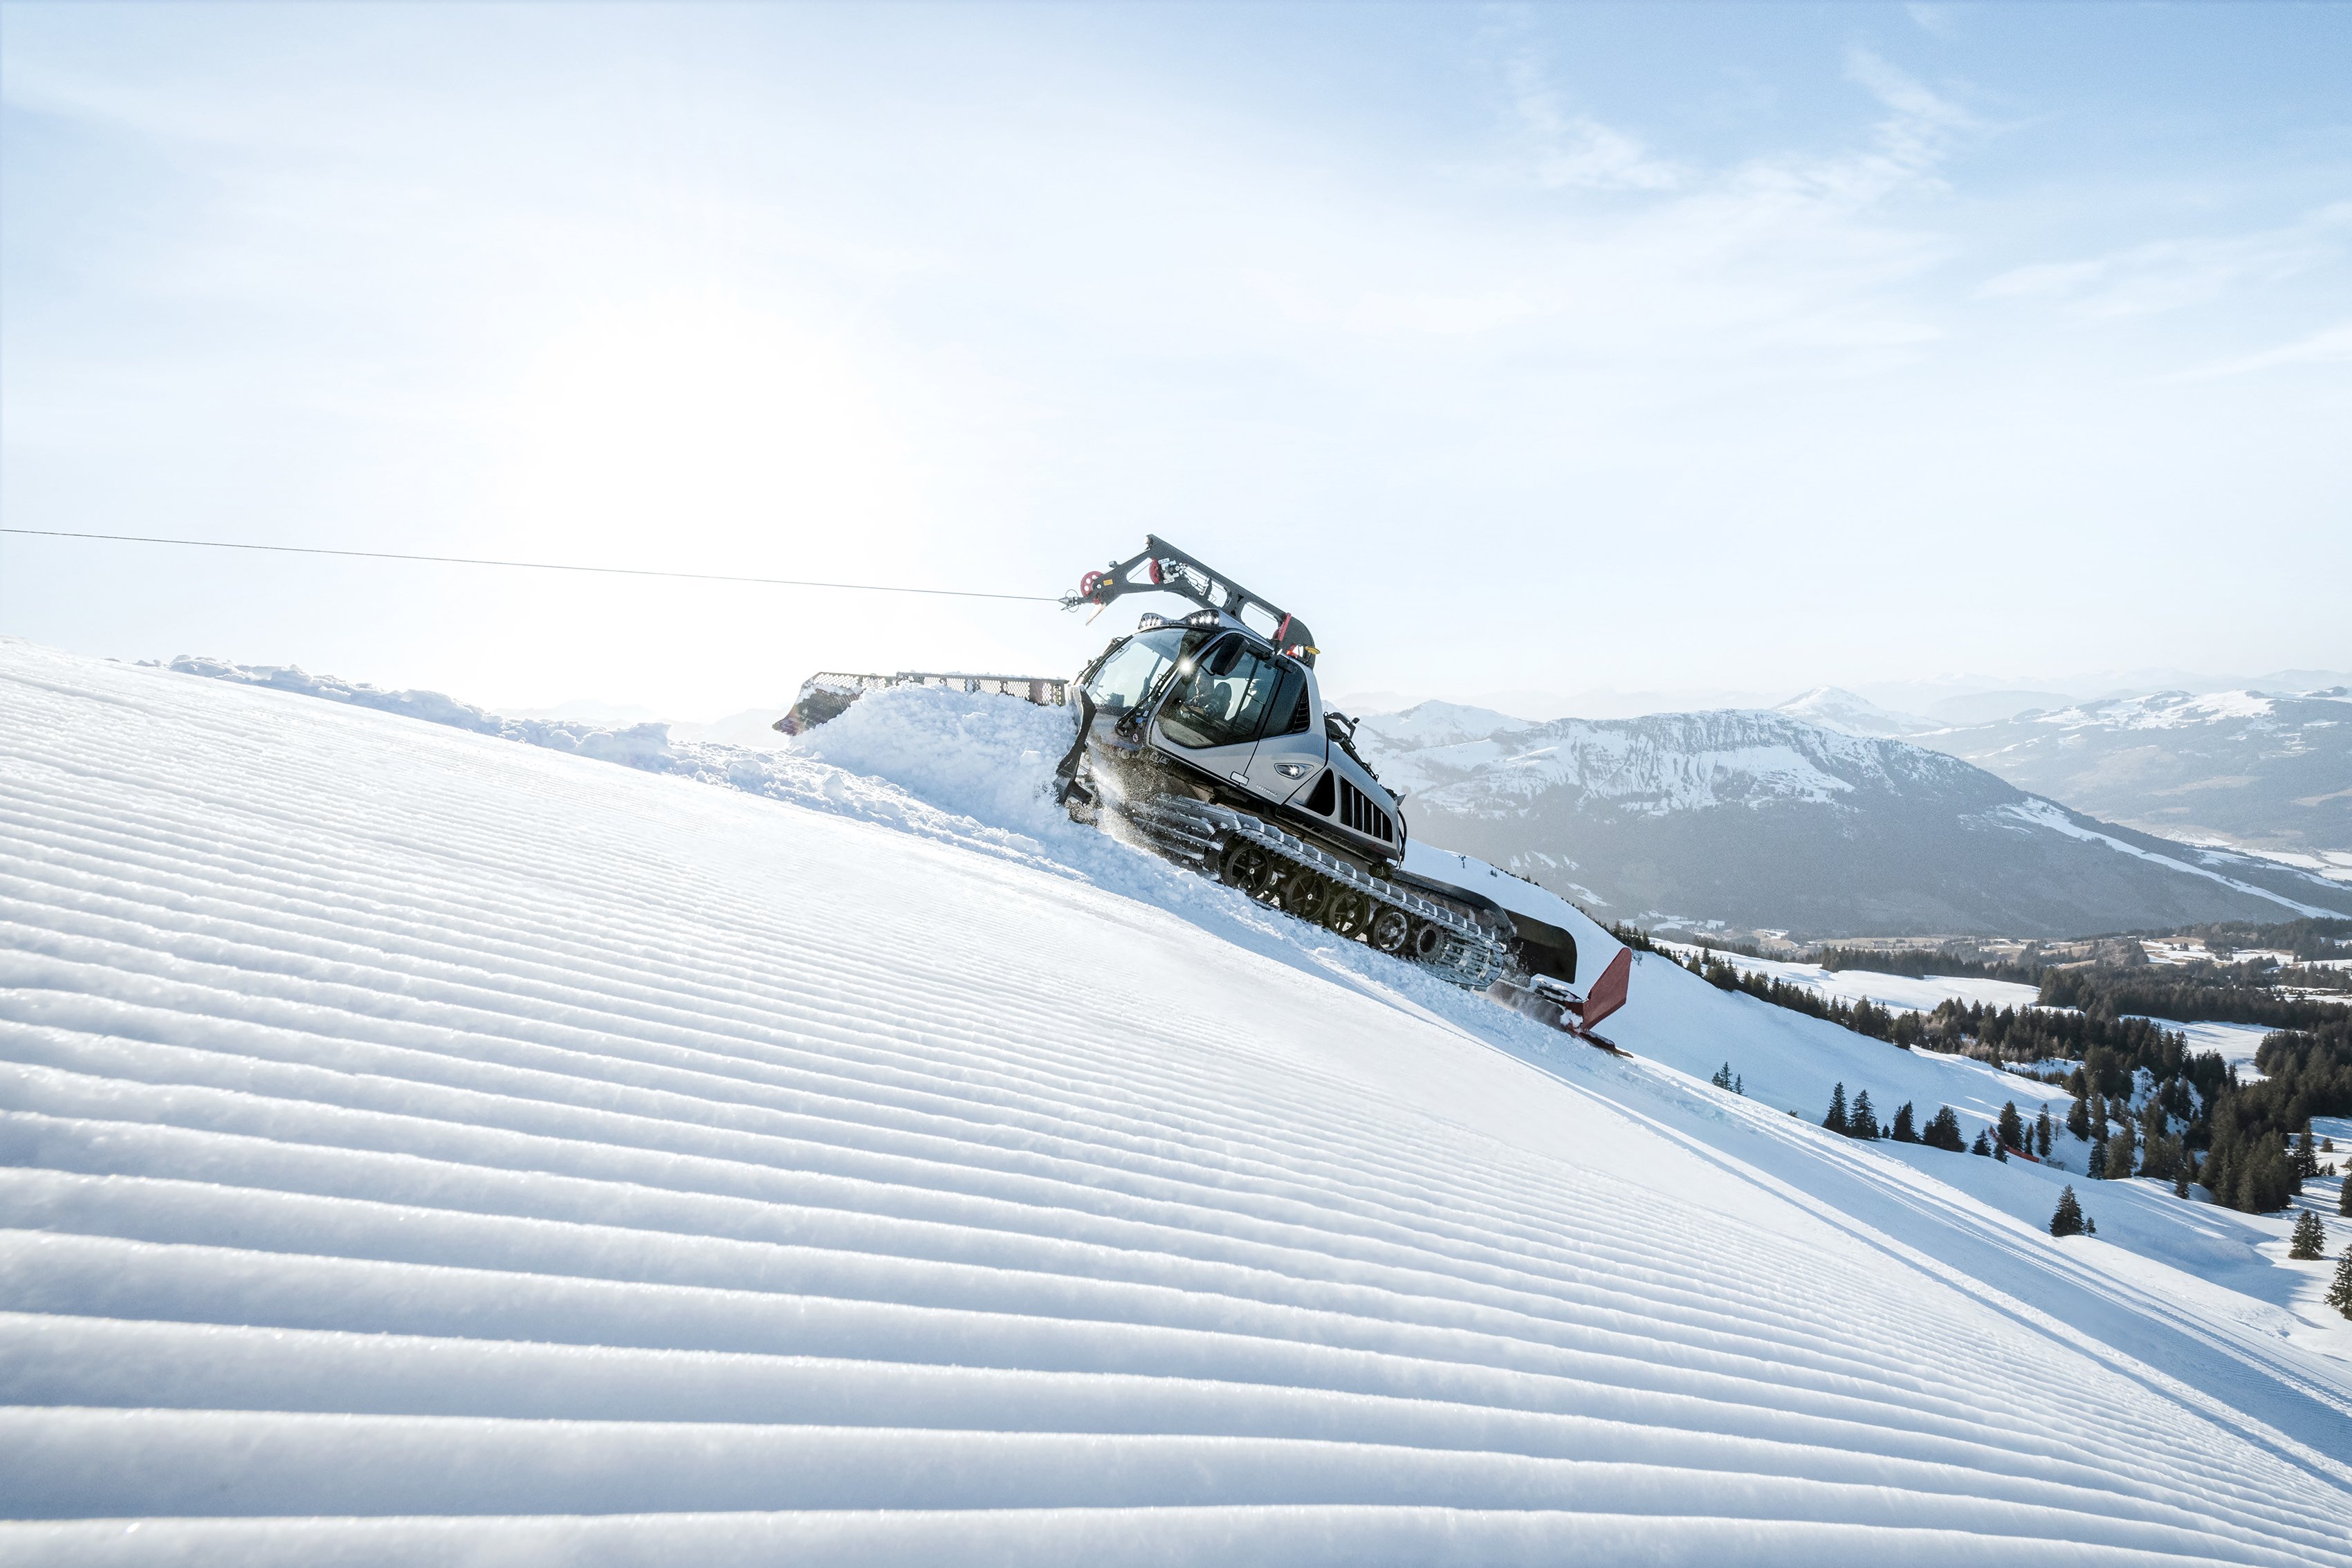 Preparing perfect slopes for over 60 years.